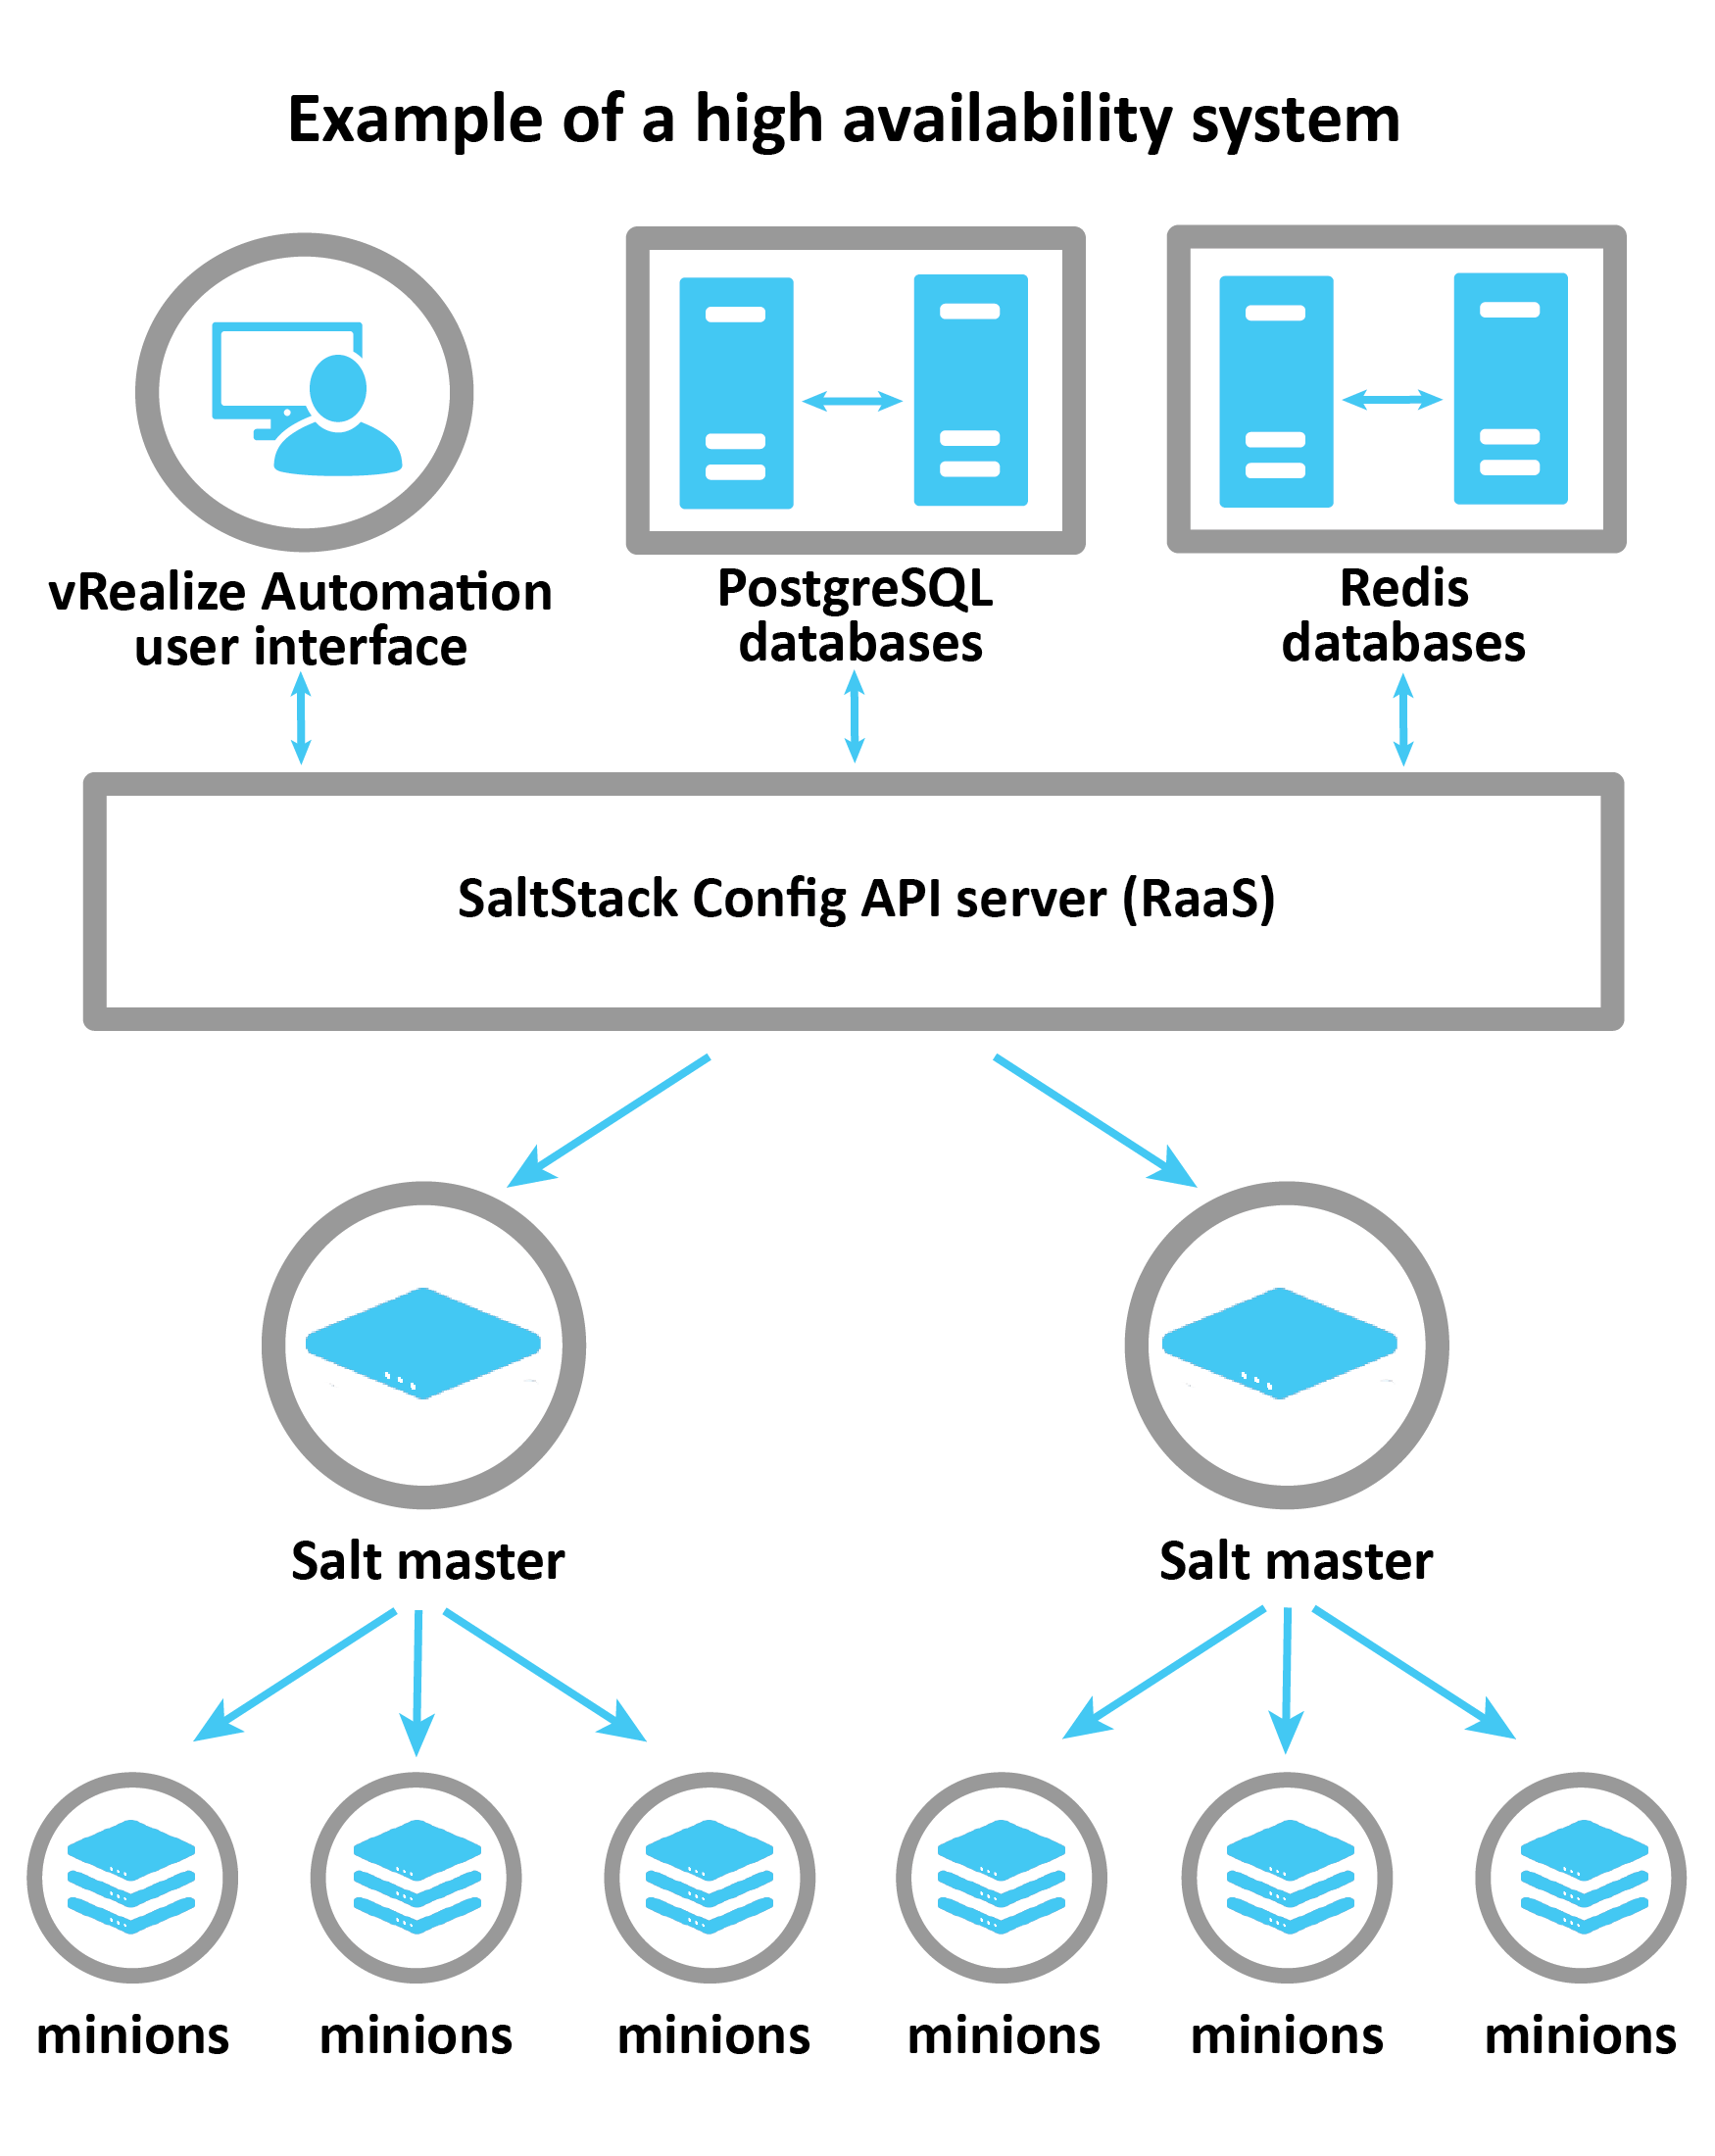 This diagram illustrates what a high availability system looks like: The vRA UI connects to the RaaS server, which controlls multiple Salt Masters, each with multiple minions.